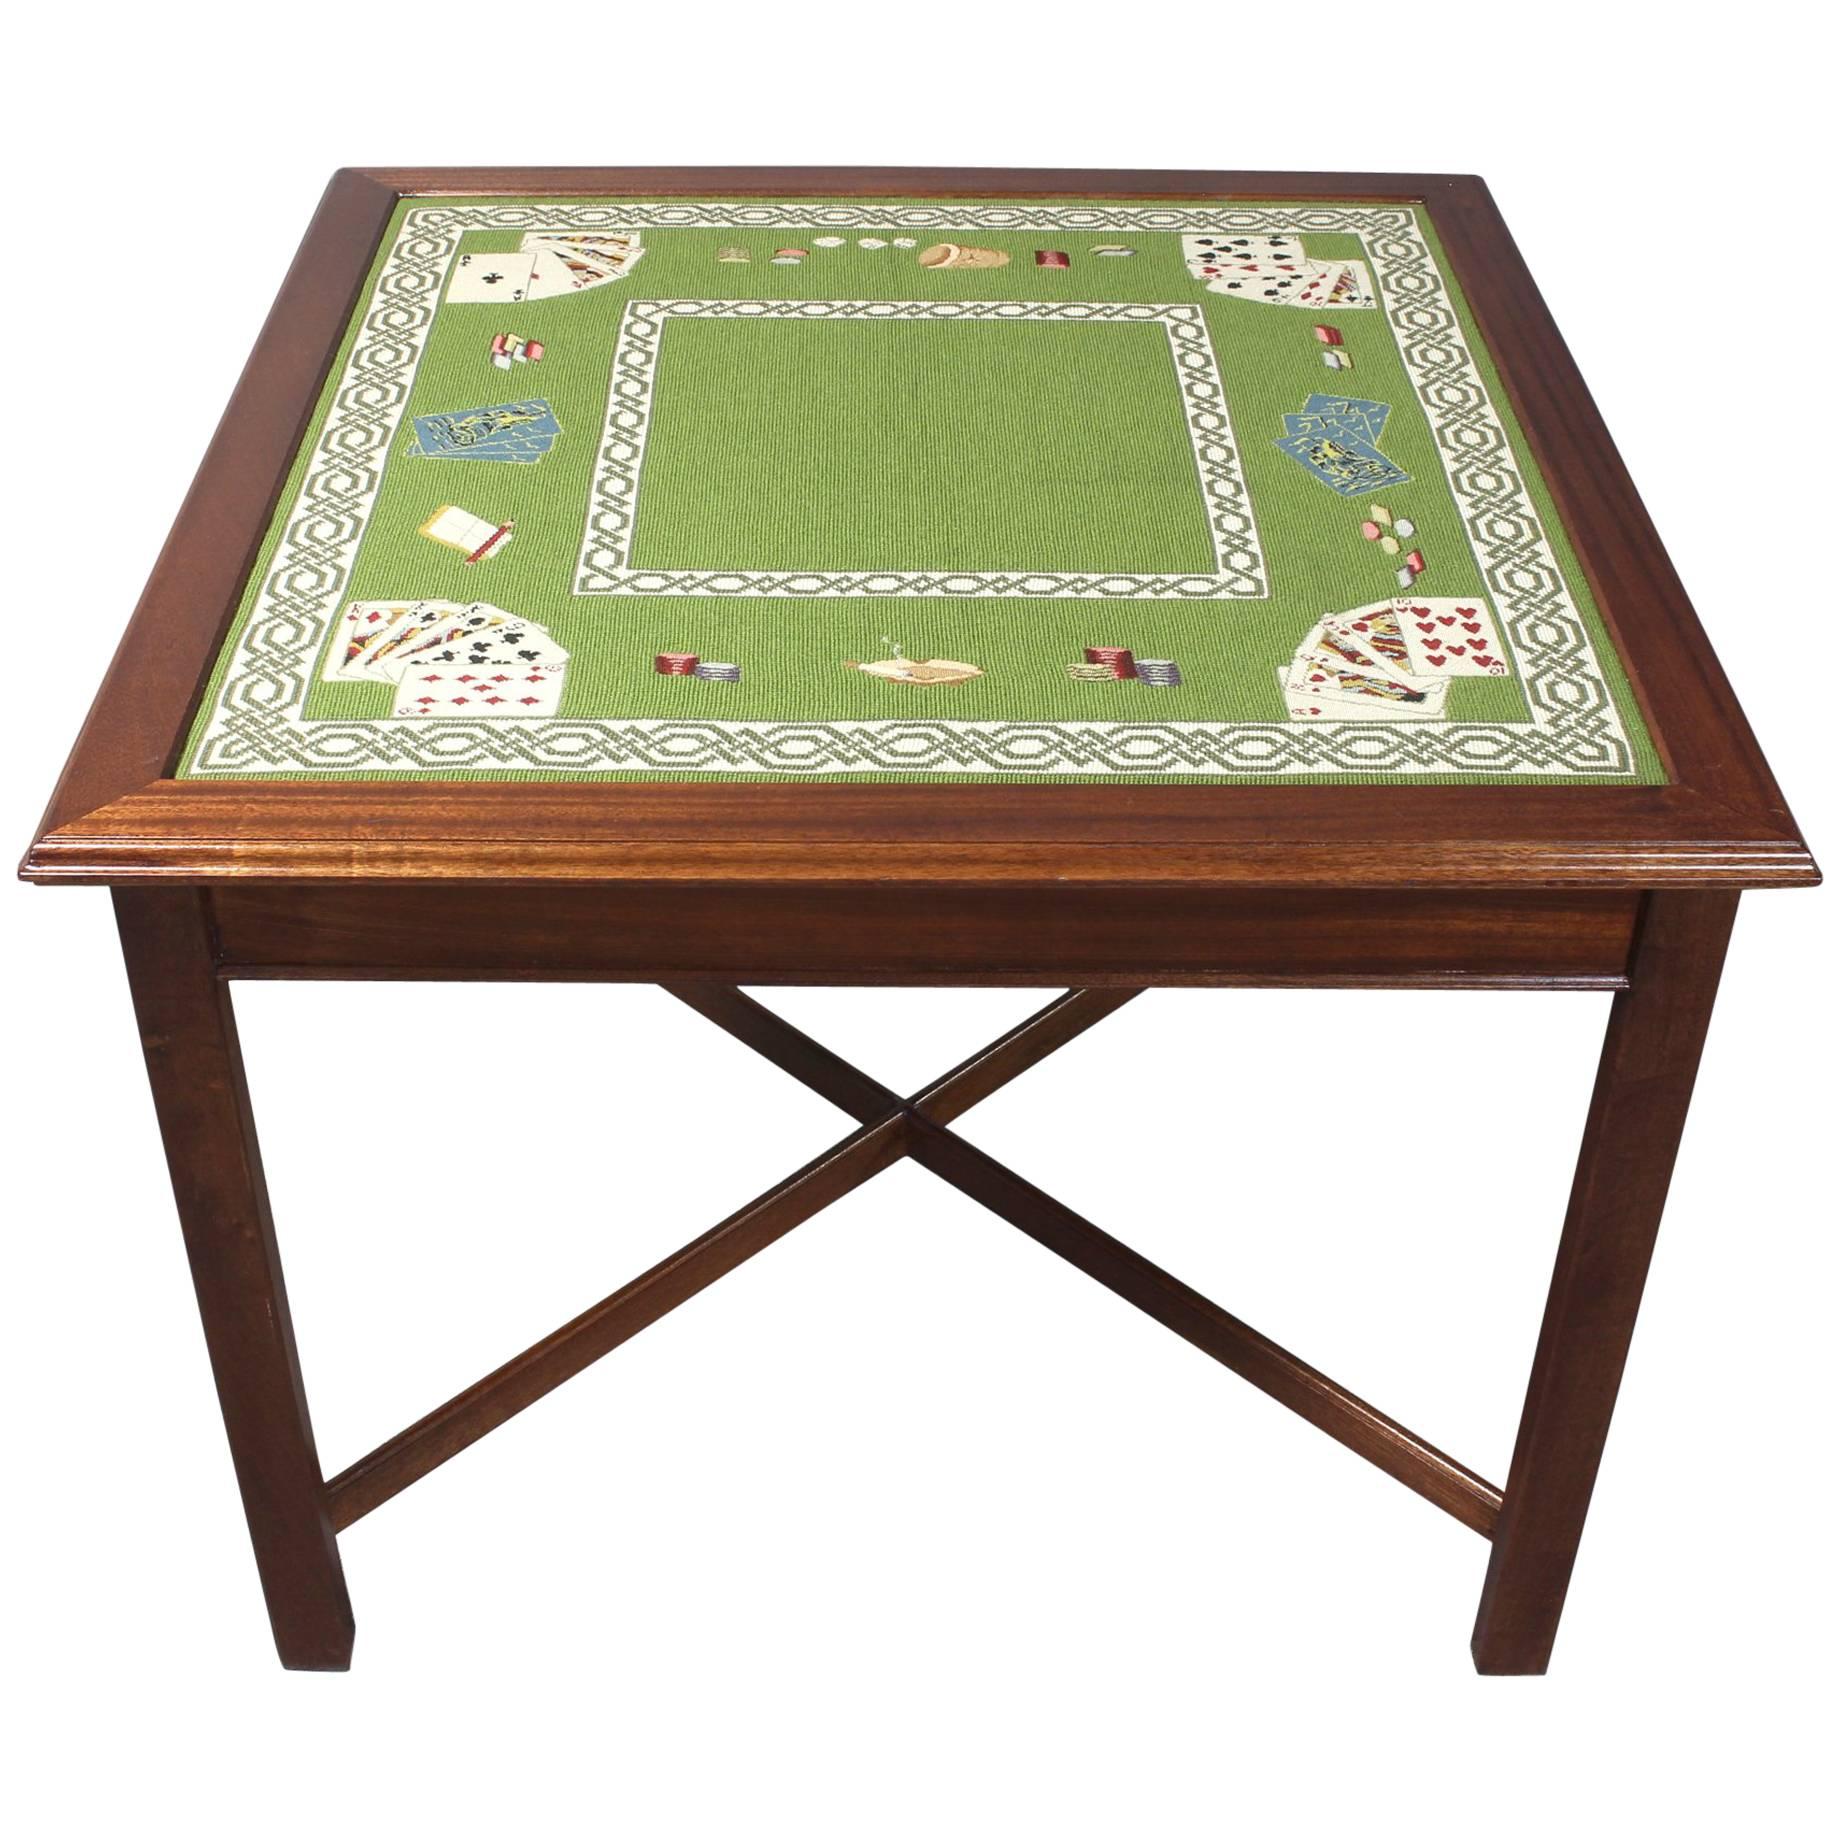 Needlepoint Top Card Table